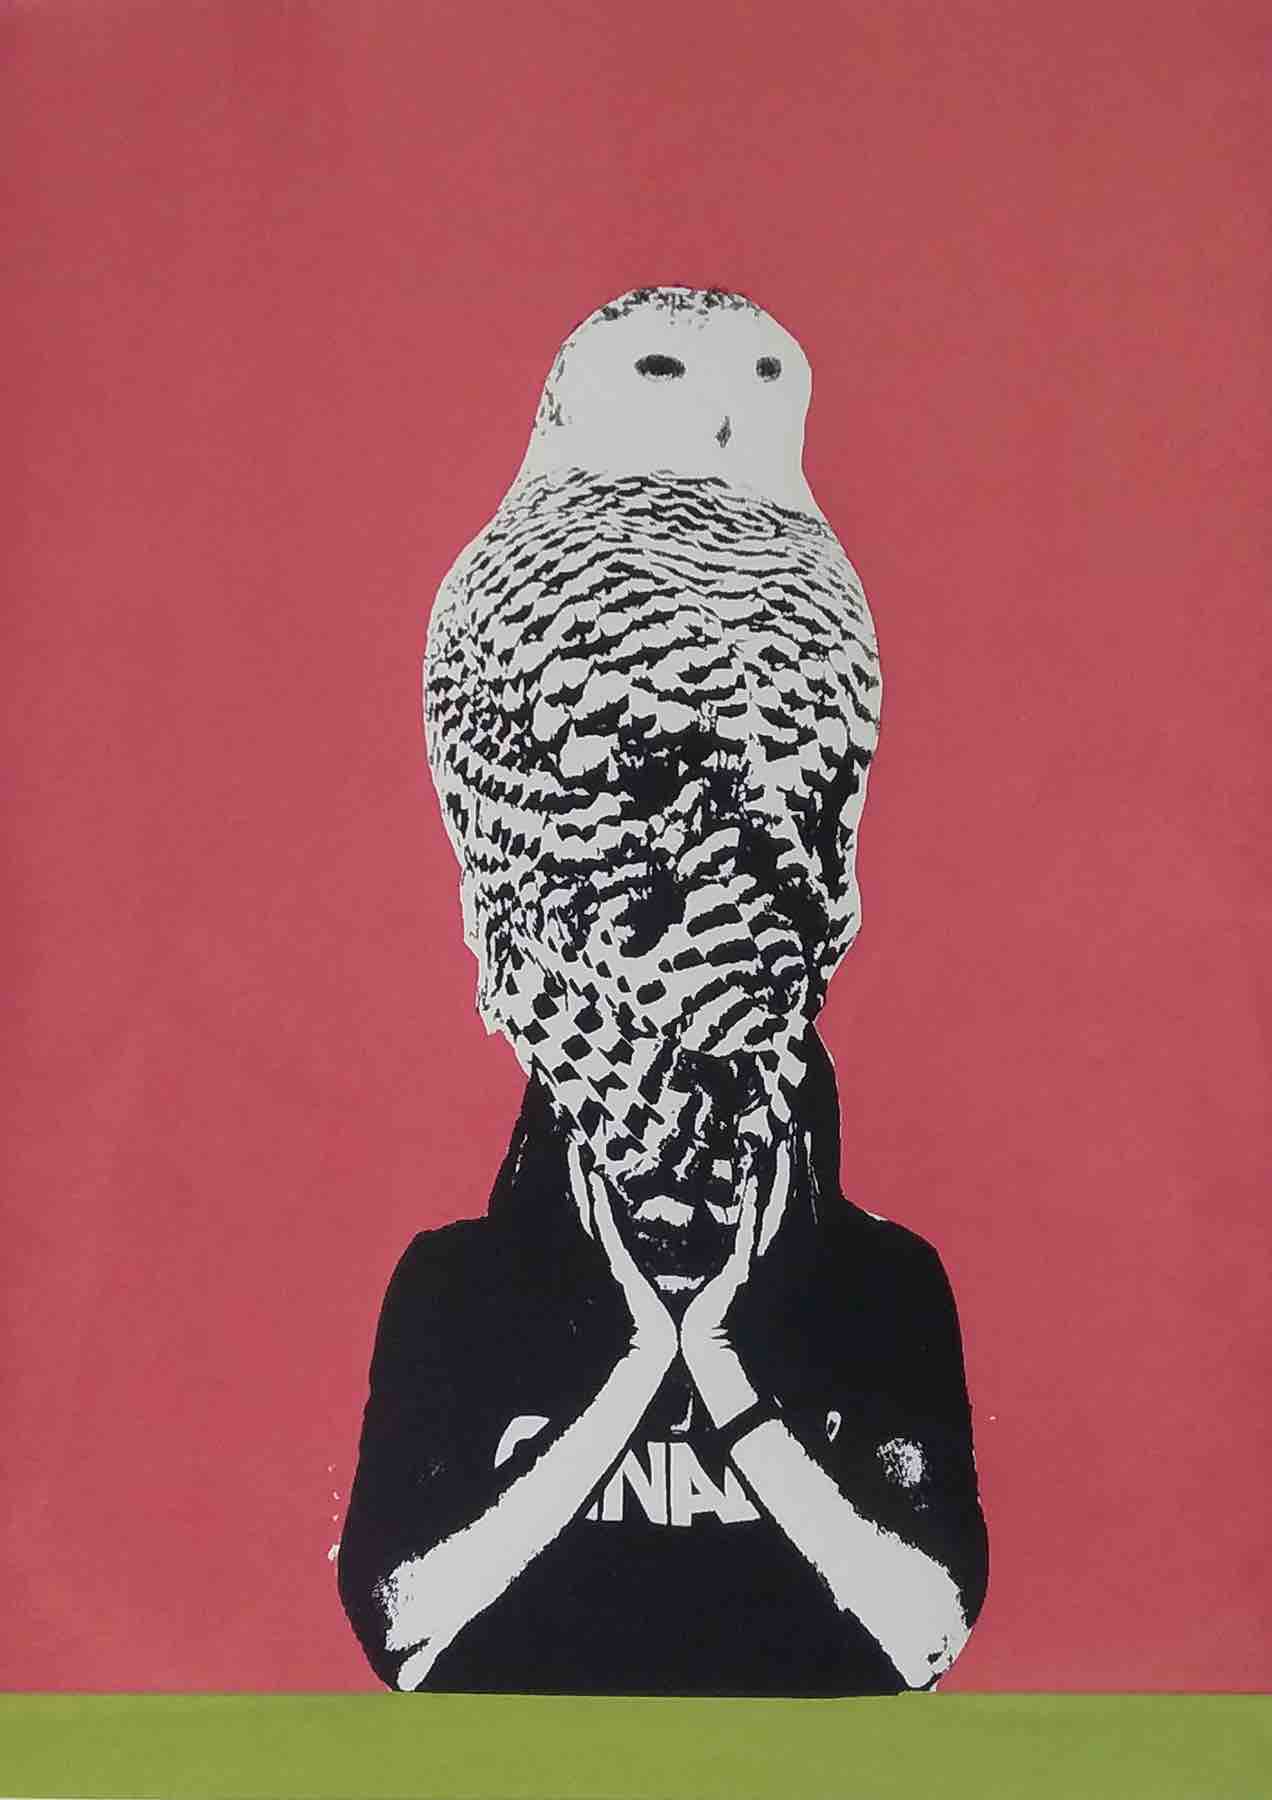 Against a warm pink background is the black and white print of the upper body of a person with their hands in front of their face. Startlingly, a giant snowy owl is perched atop the person’s hands, obscuring their face entirely, so that in effect the face is replaced by owl. The owl’s head is swiveled backwards, its even gaze is affixed somewhere over the viewer’s shoulder. The black and white markings of its feathers provide an interesting visual texture that draws attention.